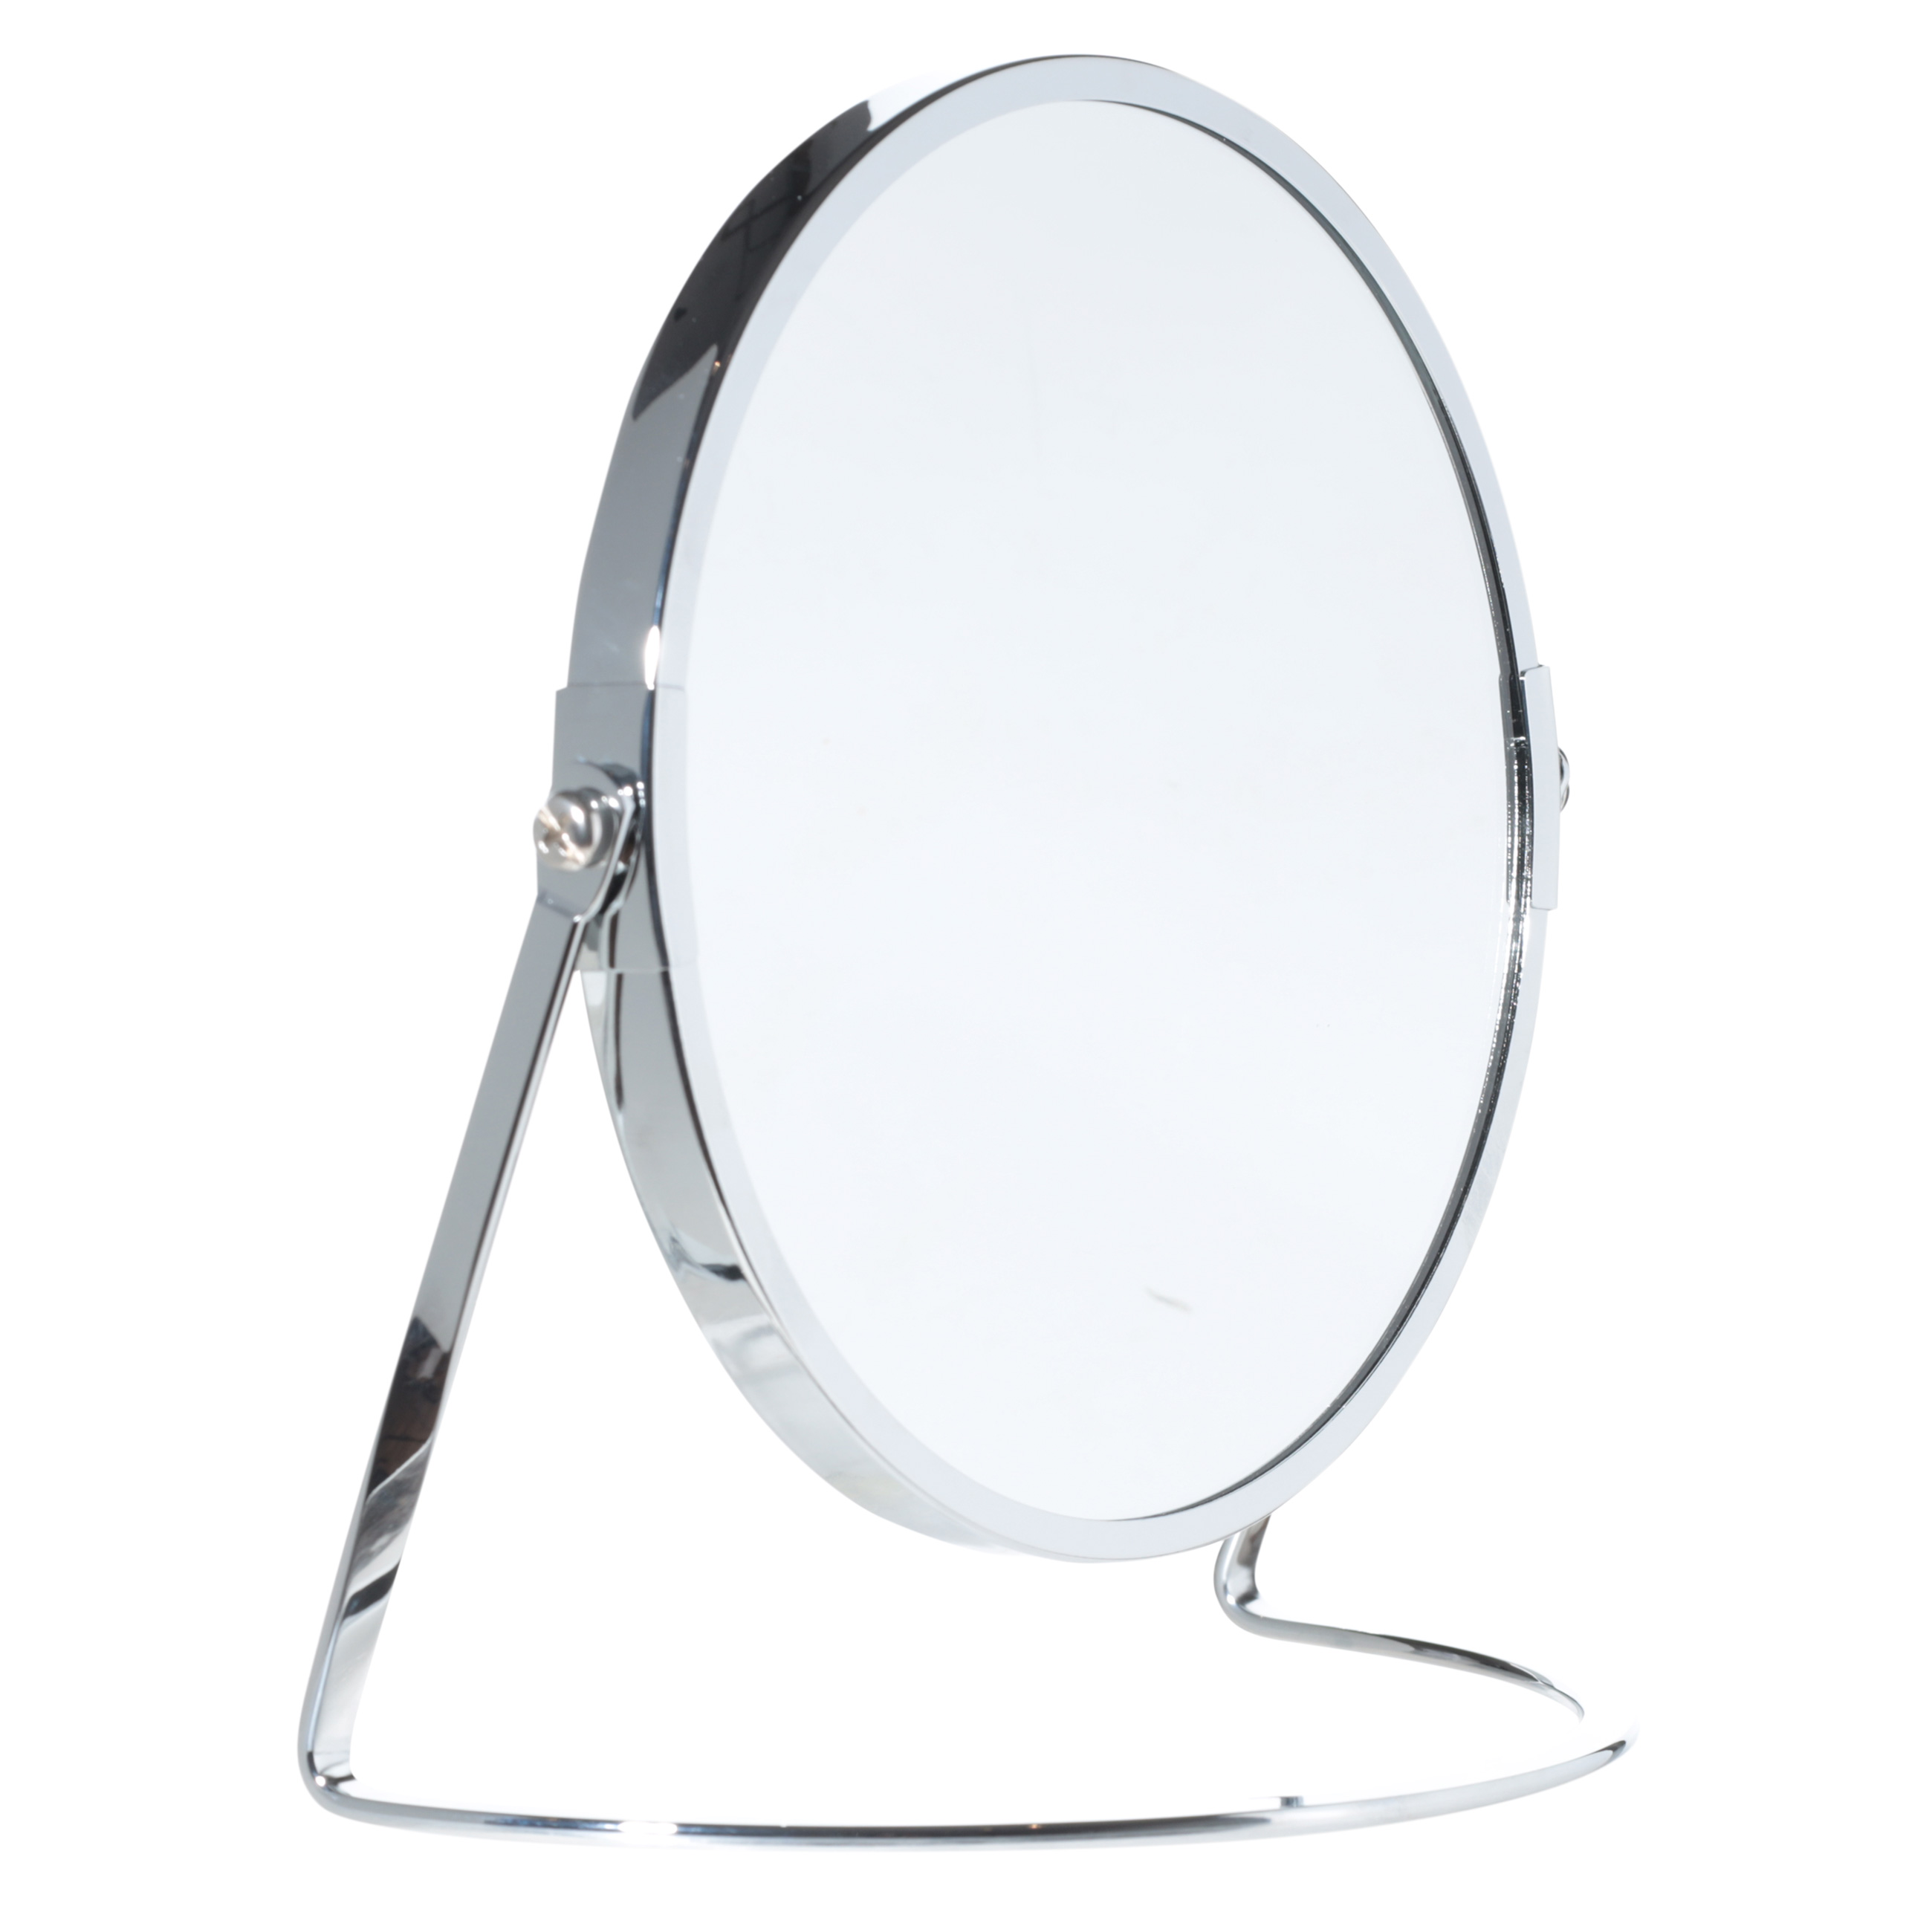 Table mirror, 20x17 cm, double-sided, metal, round, Fantastic изображение № 2